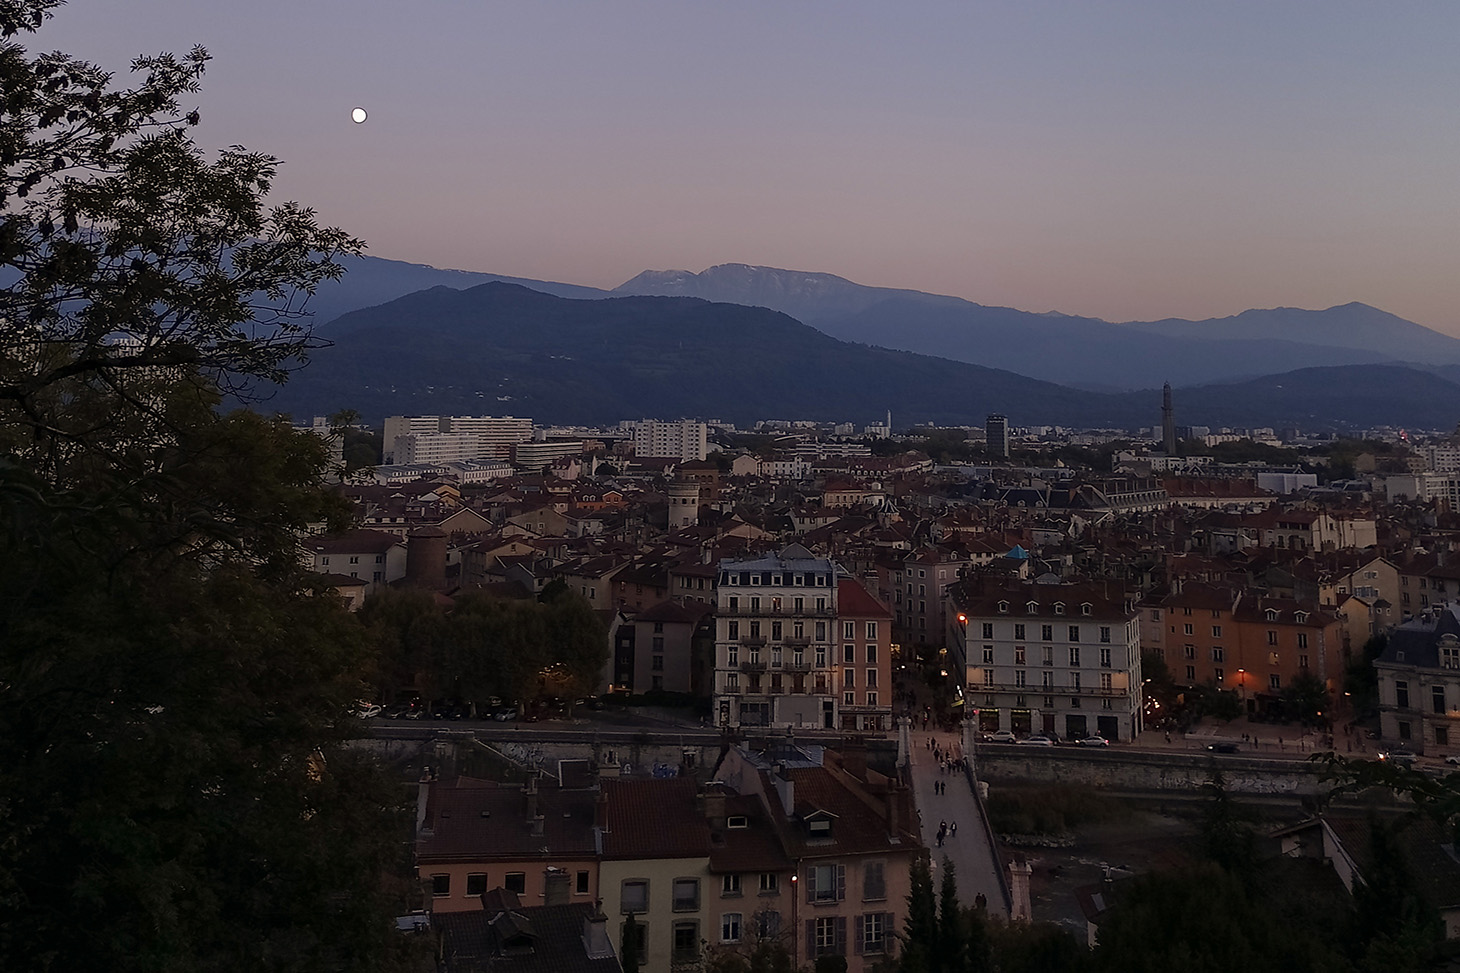 The night view of Grenoble